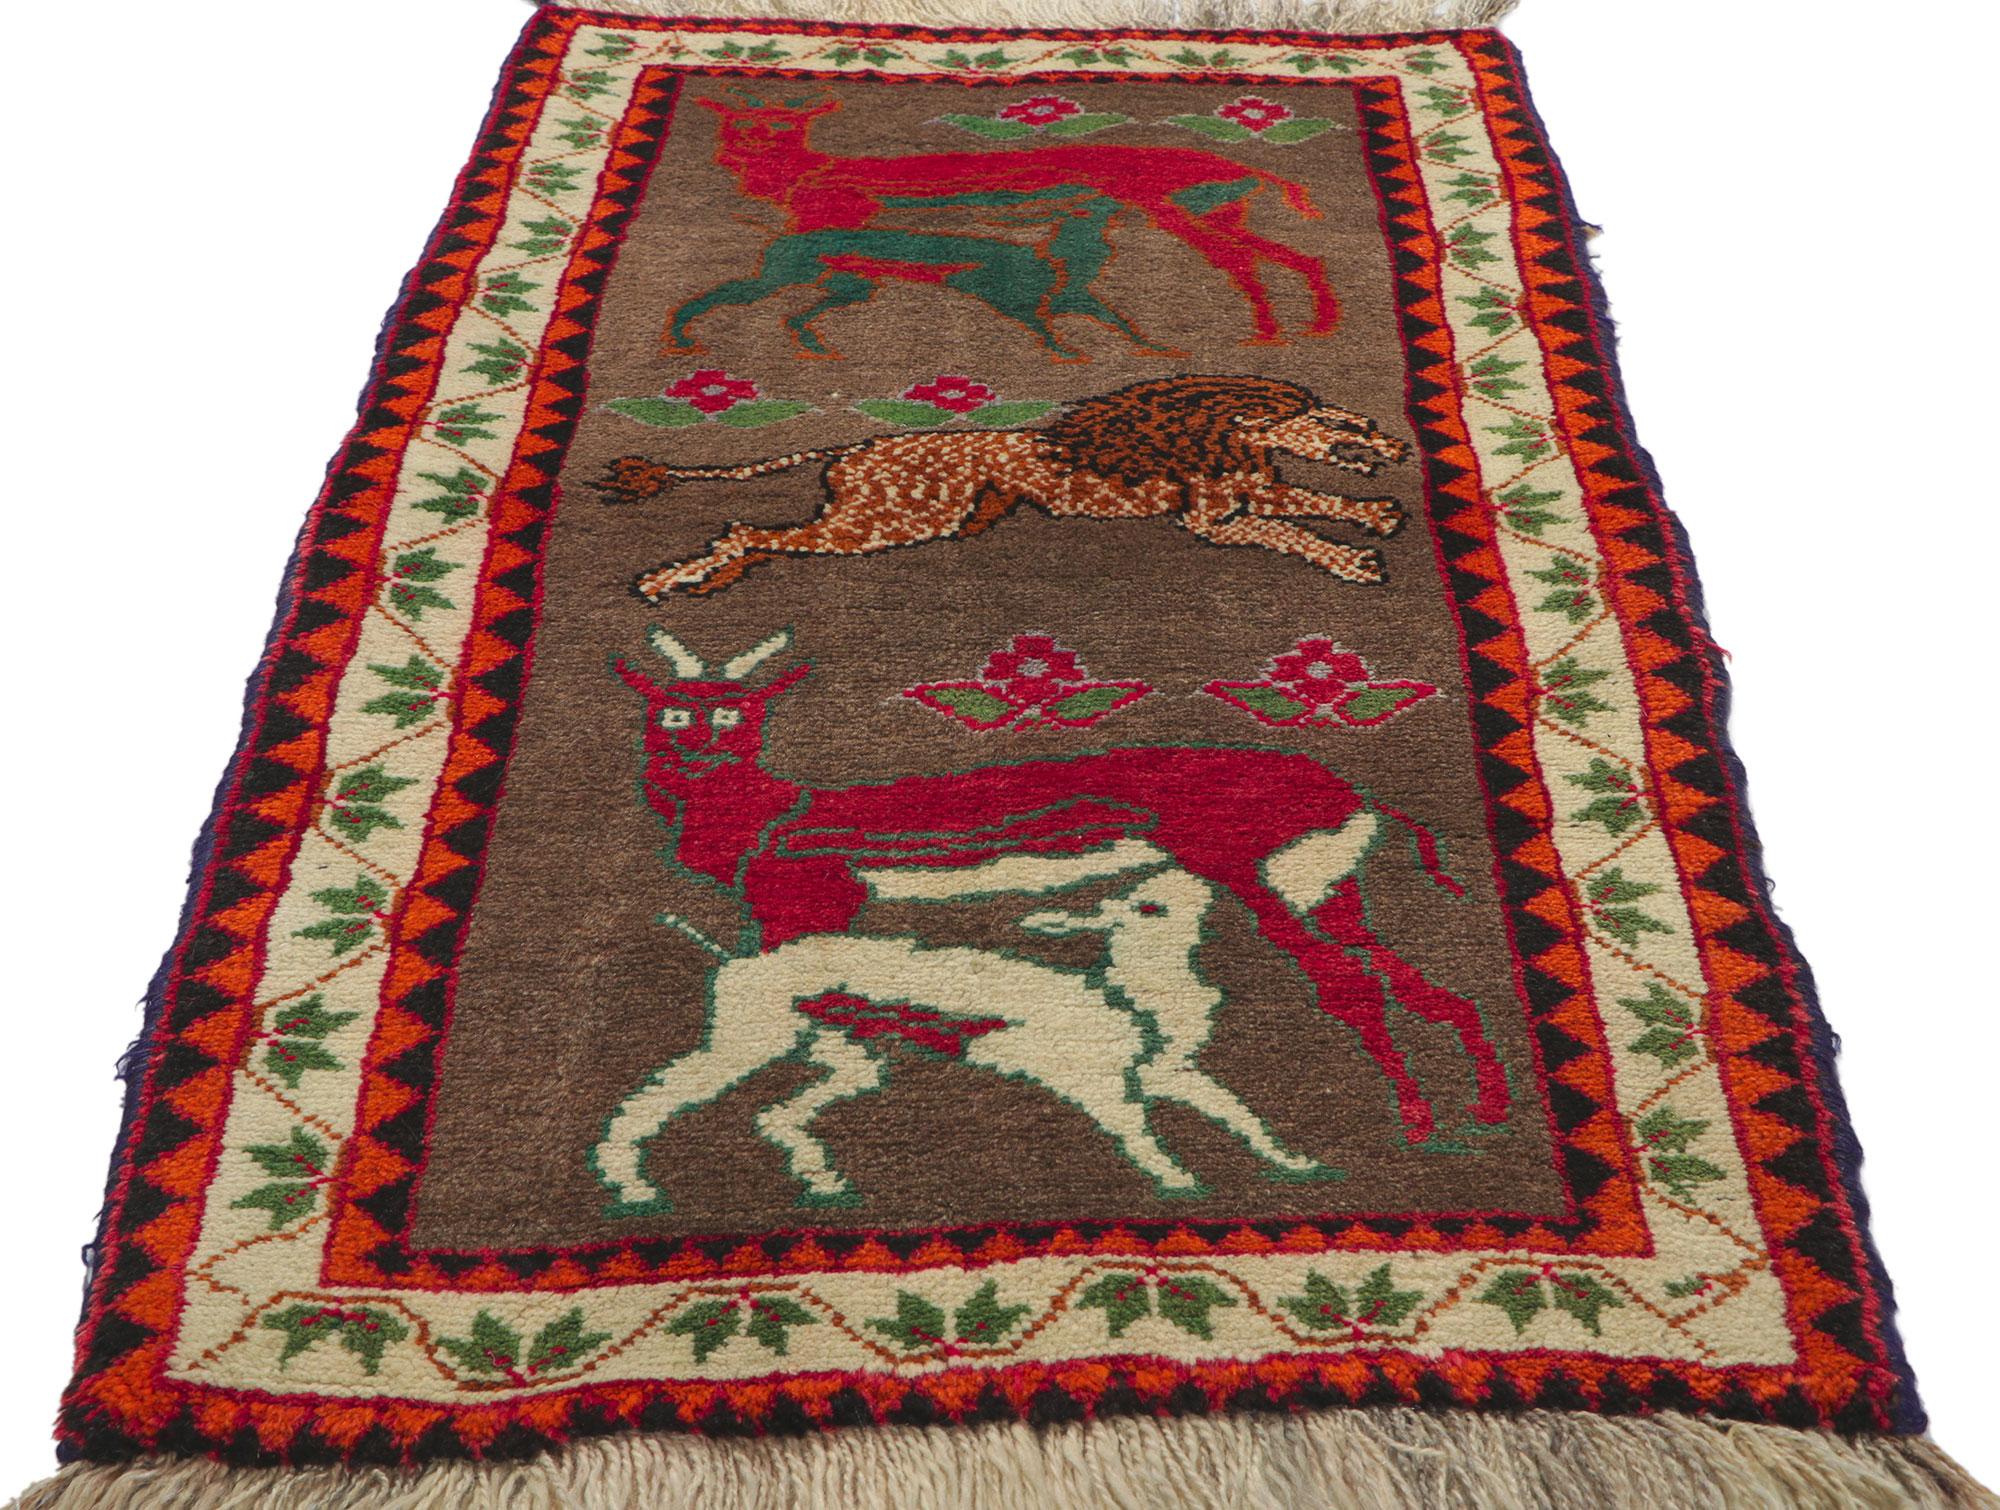 Vintage Persian Qashqai Gabbeh Rug with Zoomorphic Design In Good Condition For Sale In Dallas, TX